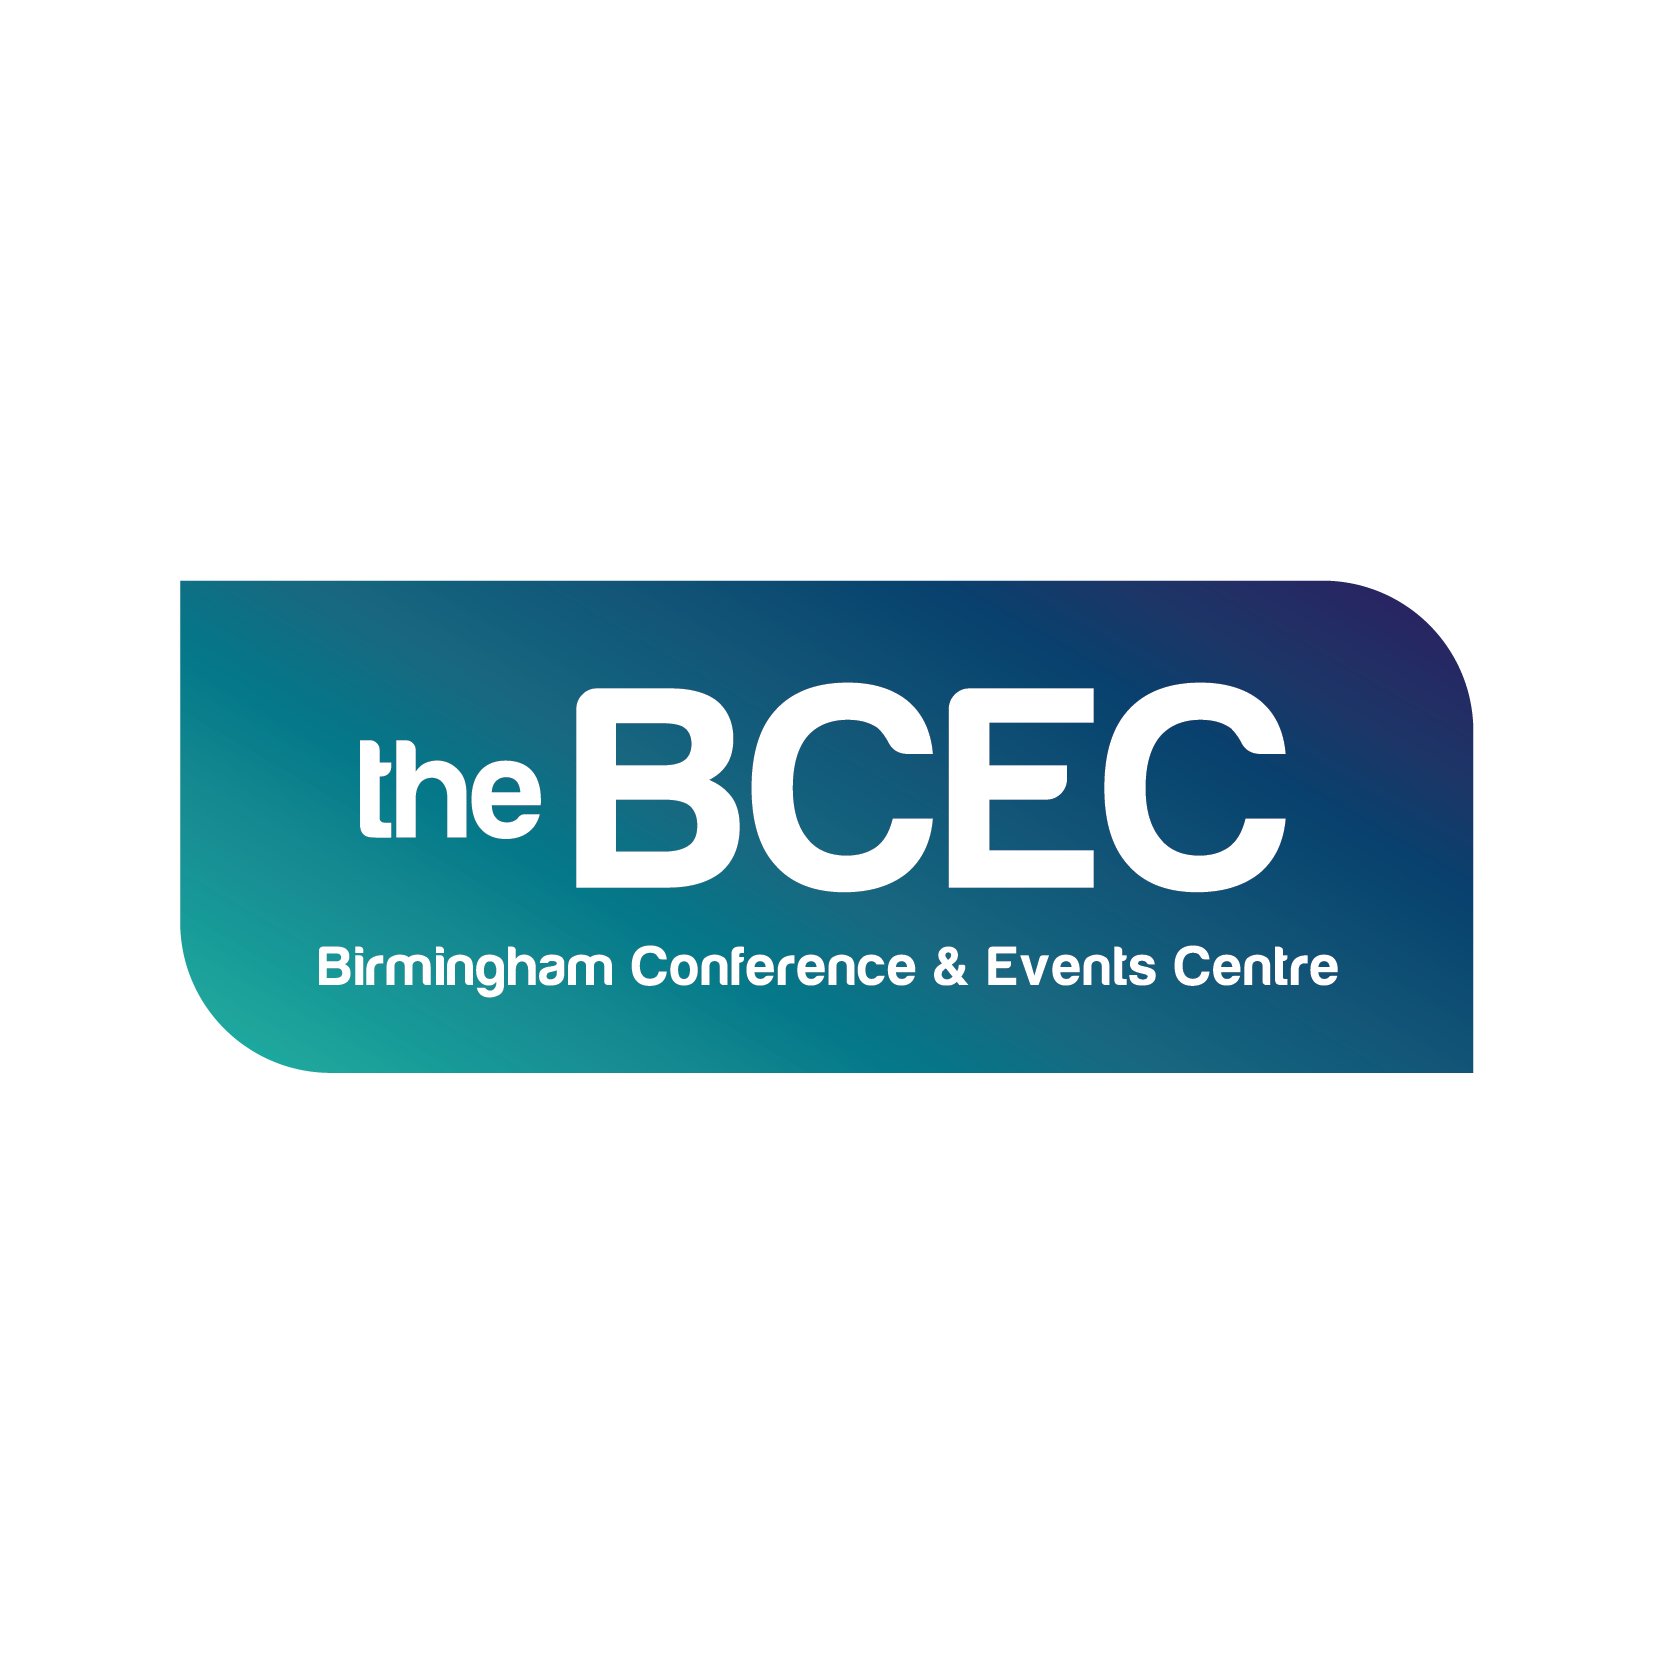 Located in the heart of the city, next door to the Holiday Inn, the Birmingham Conference and Events Centre is a new purpose built function centre.